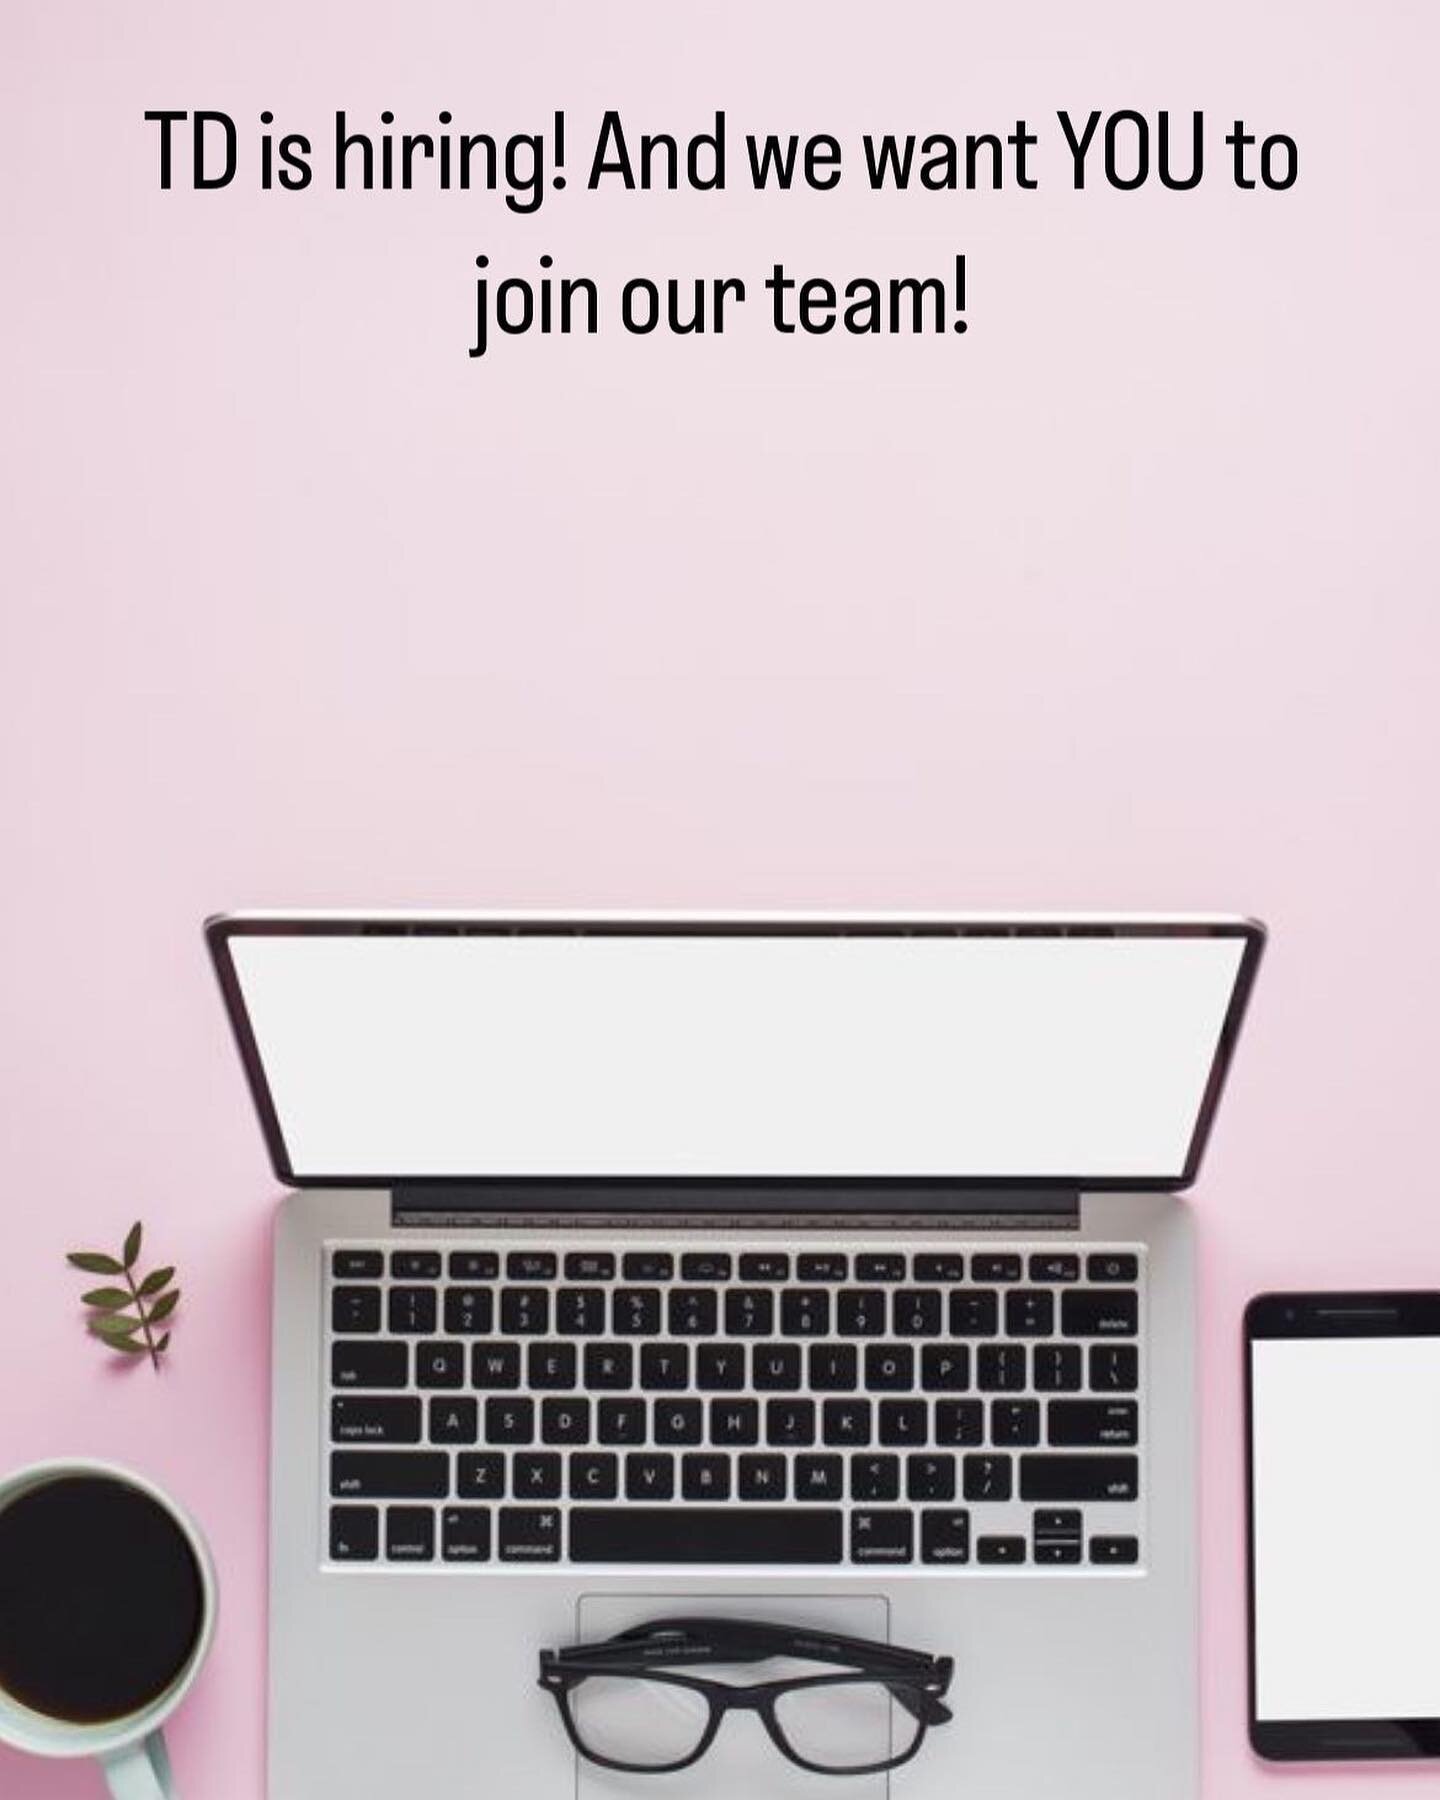 Tina Dragone is looking to expand our team! 💕 Looking for - a passion for fashion, retail experience, &amp; part time position. Please send all inquires to: tinamdragone@sbcglobal.net